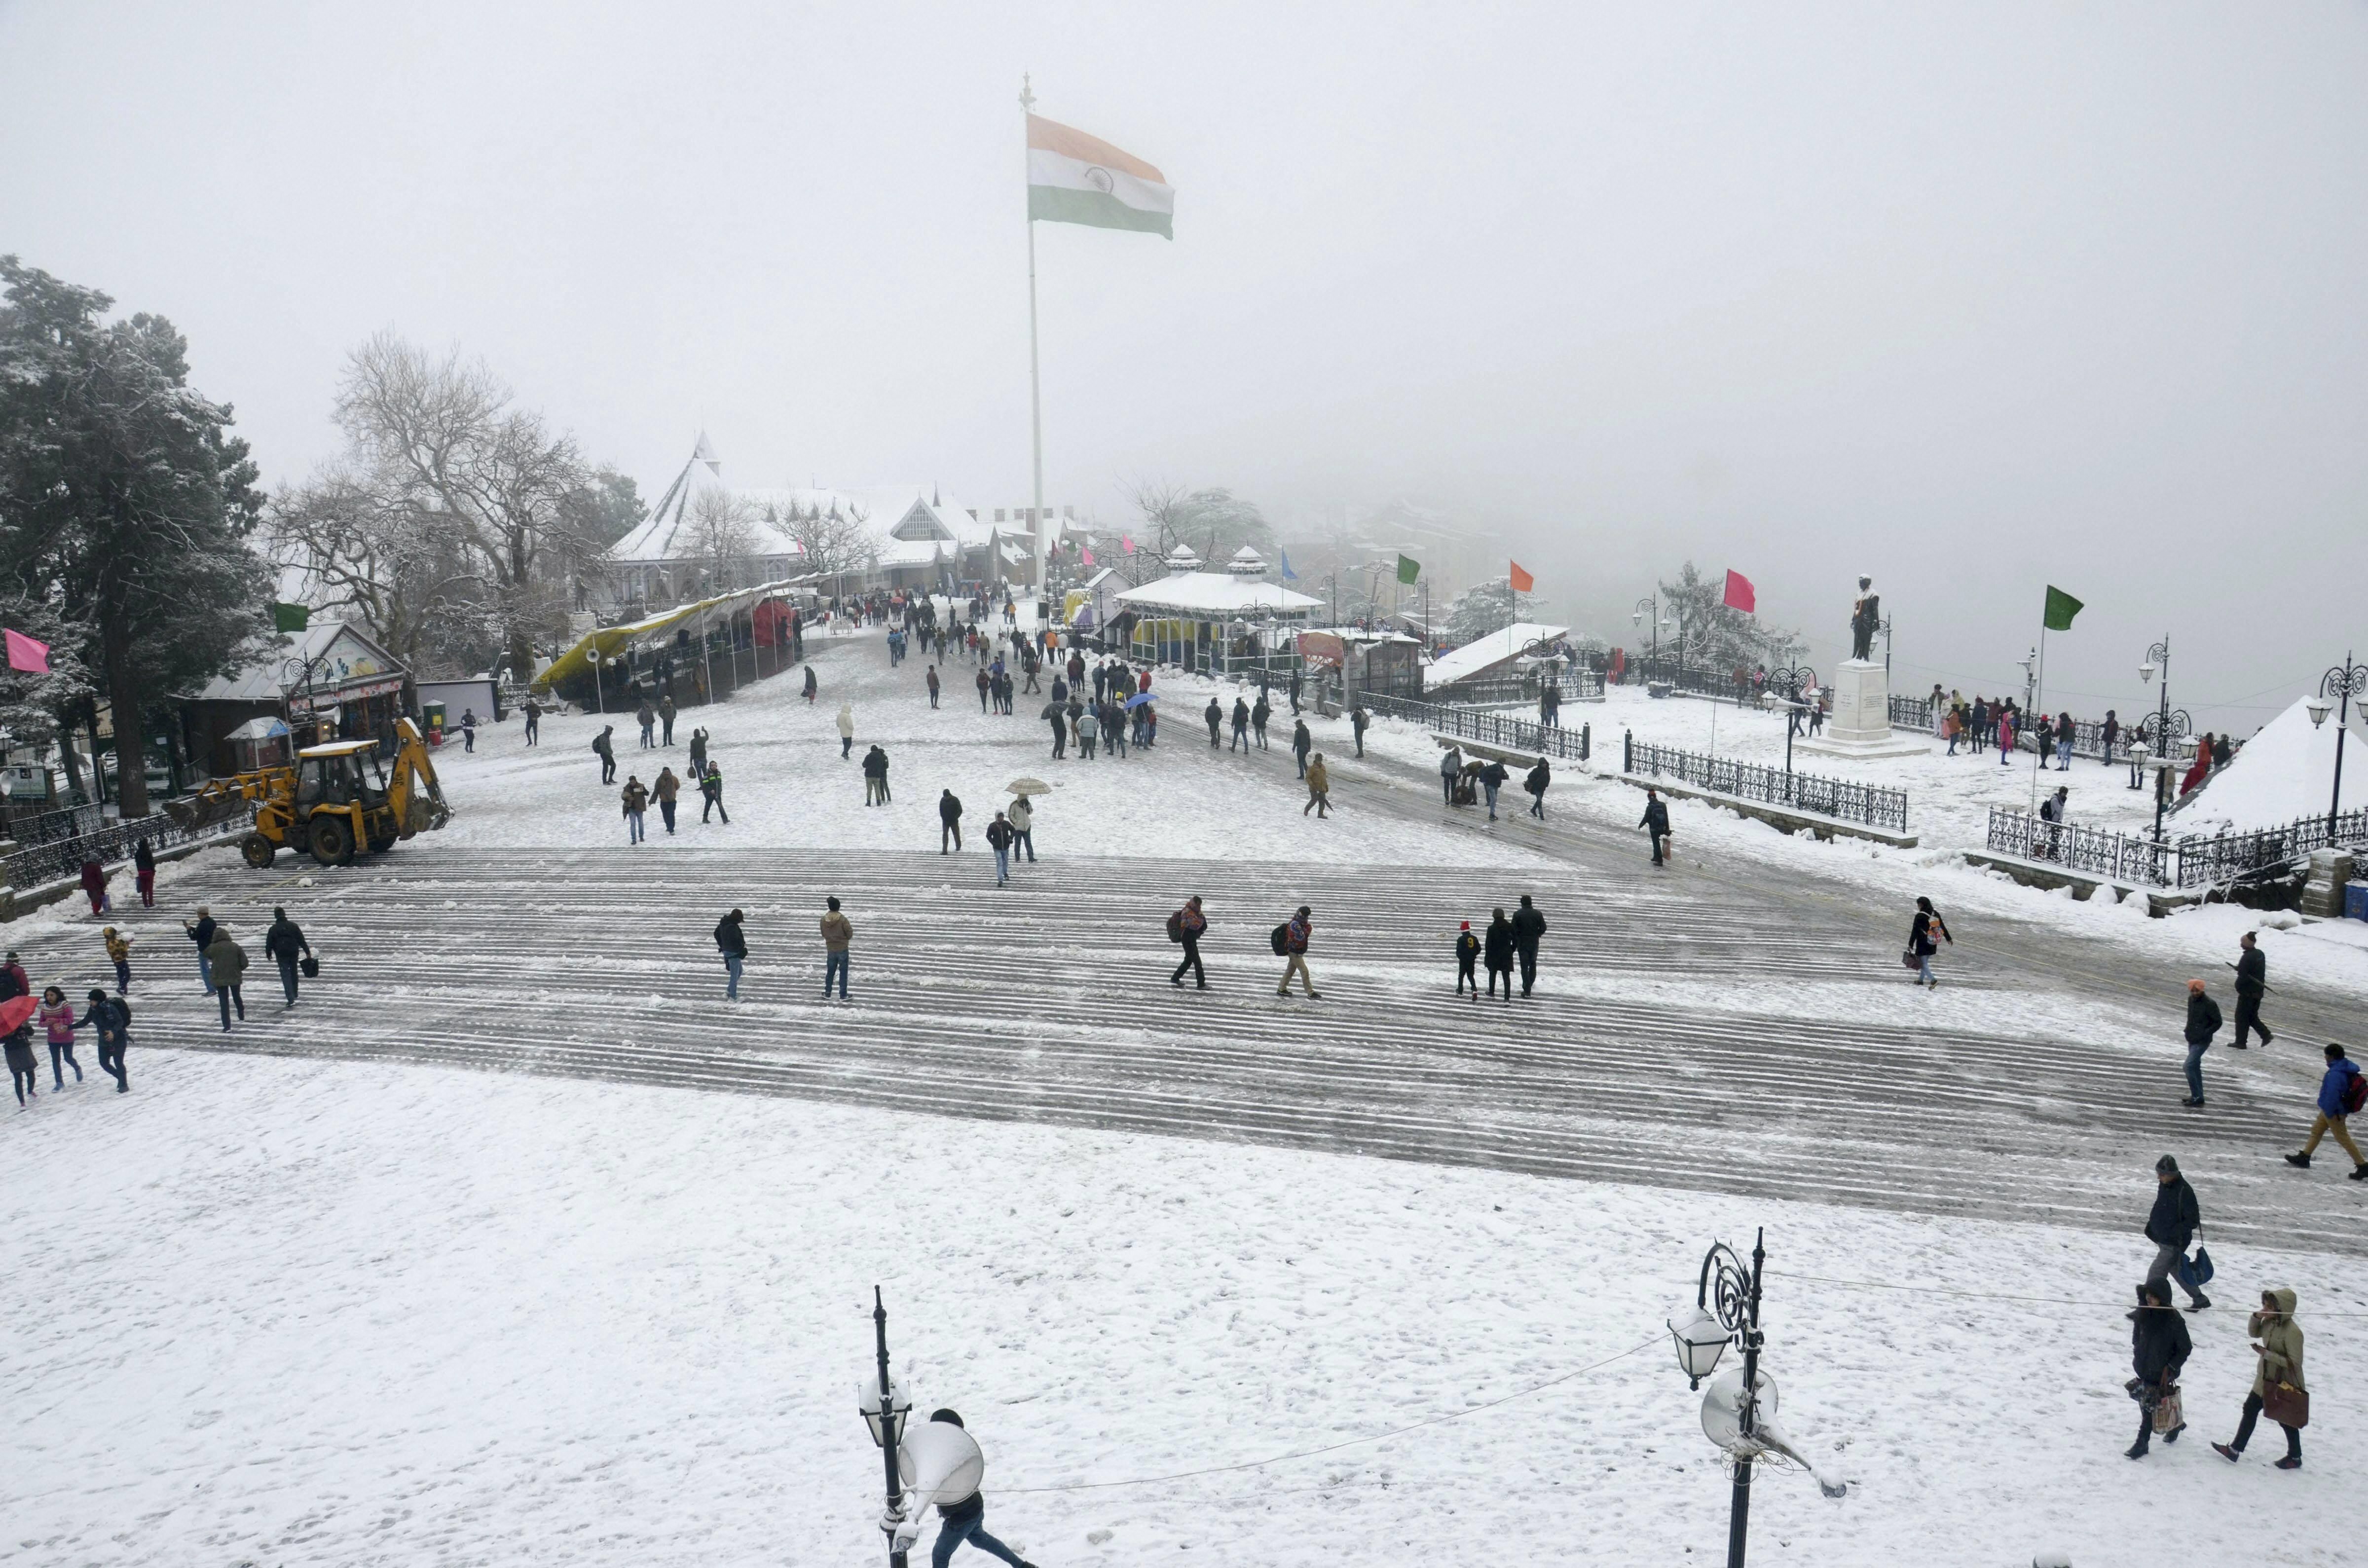 A view of the snow covered historical ridge after fresh snowfall in Shimla